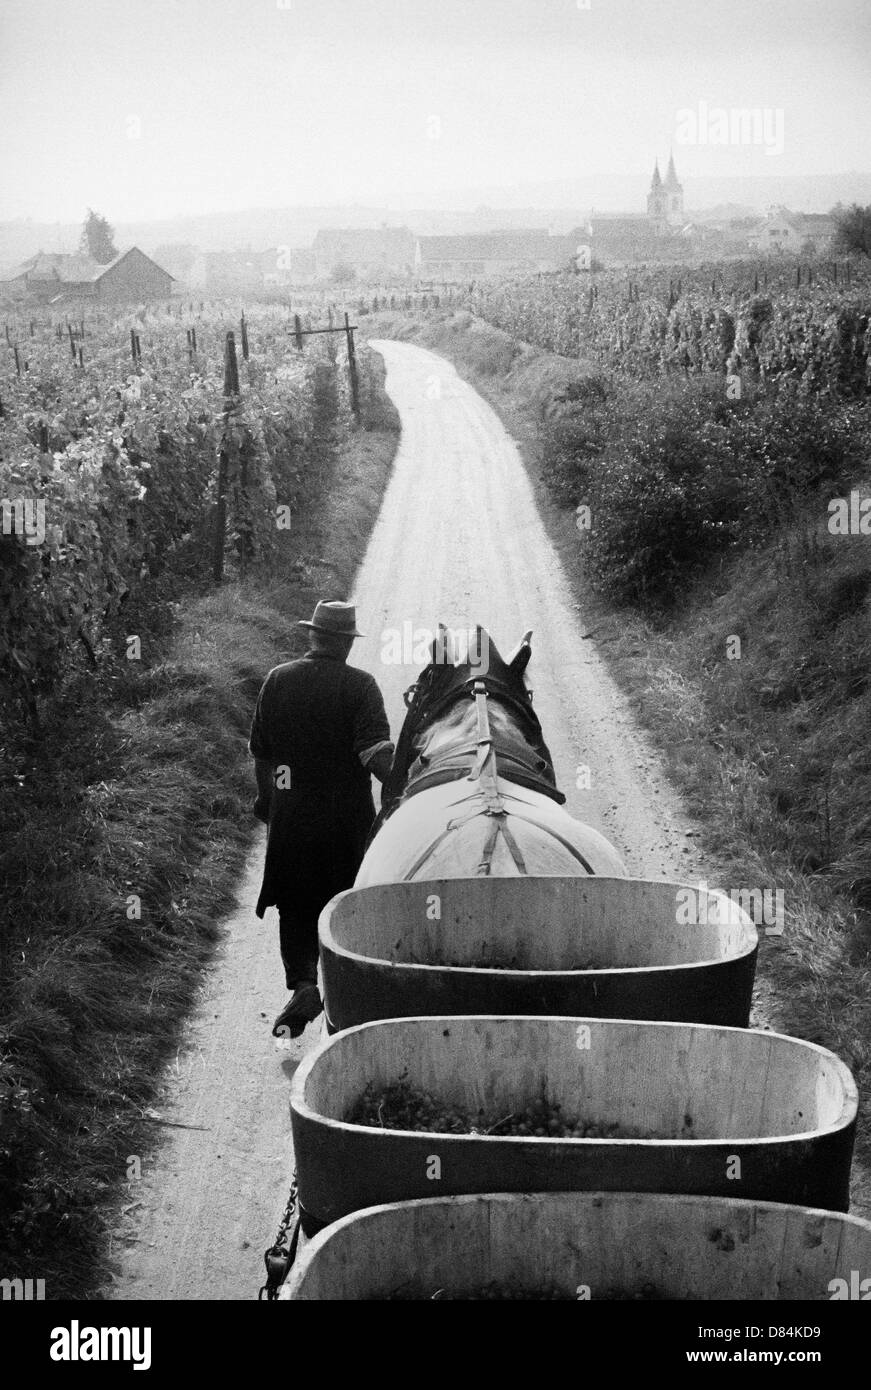 1963 Horse-drawn trailer with grape crop Alsace France Europe Stock Photo